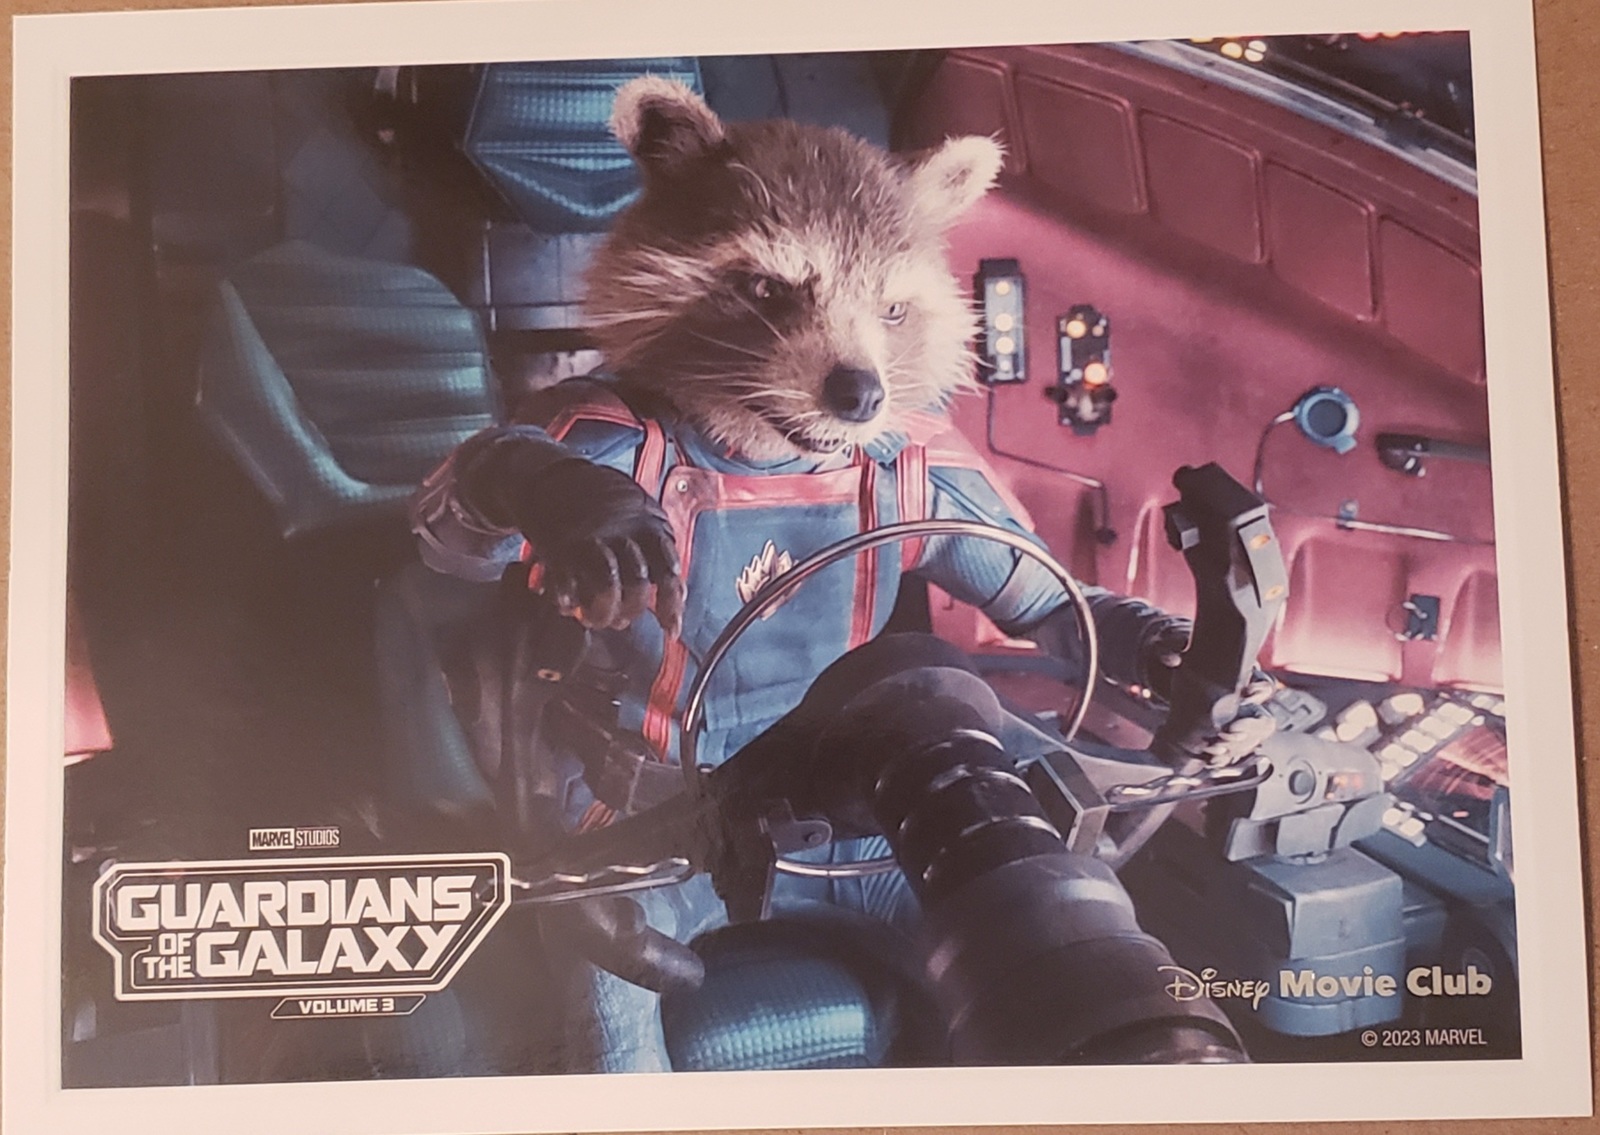 Primary image for Guardians of the Galaxy Volume 3 Lithograph Disney Movie Club Exclusive NEW